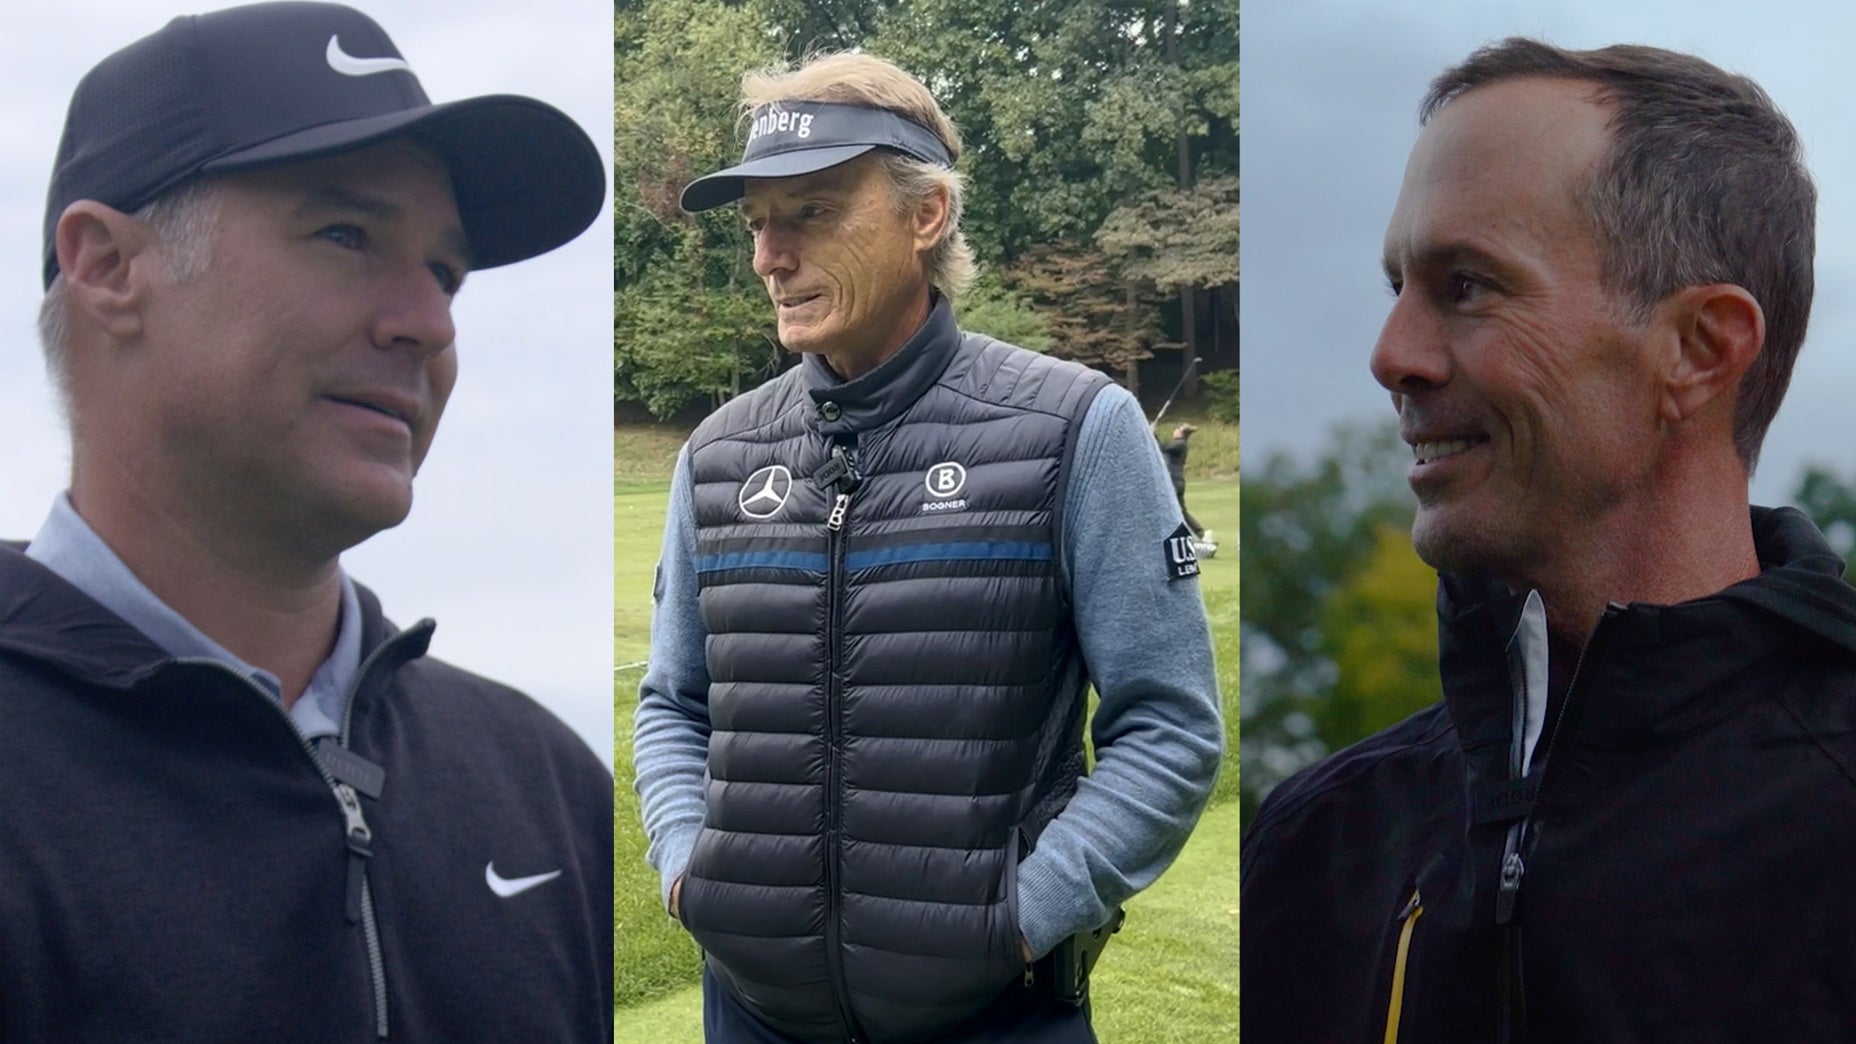 Three former Masters champions - Trevor Immelman, Mike Weir, and Bernhard Langer - give advice for golfers making their debut at Augusta